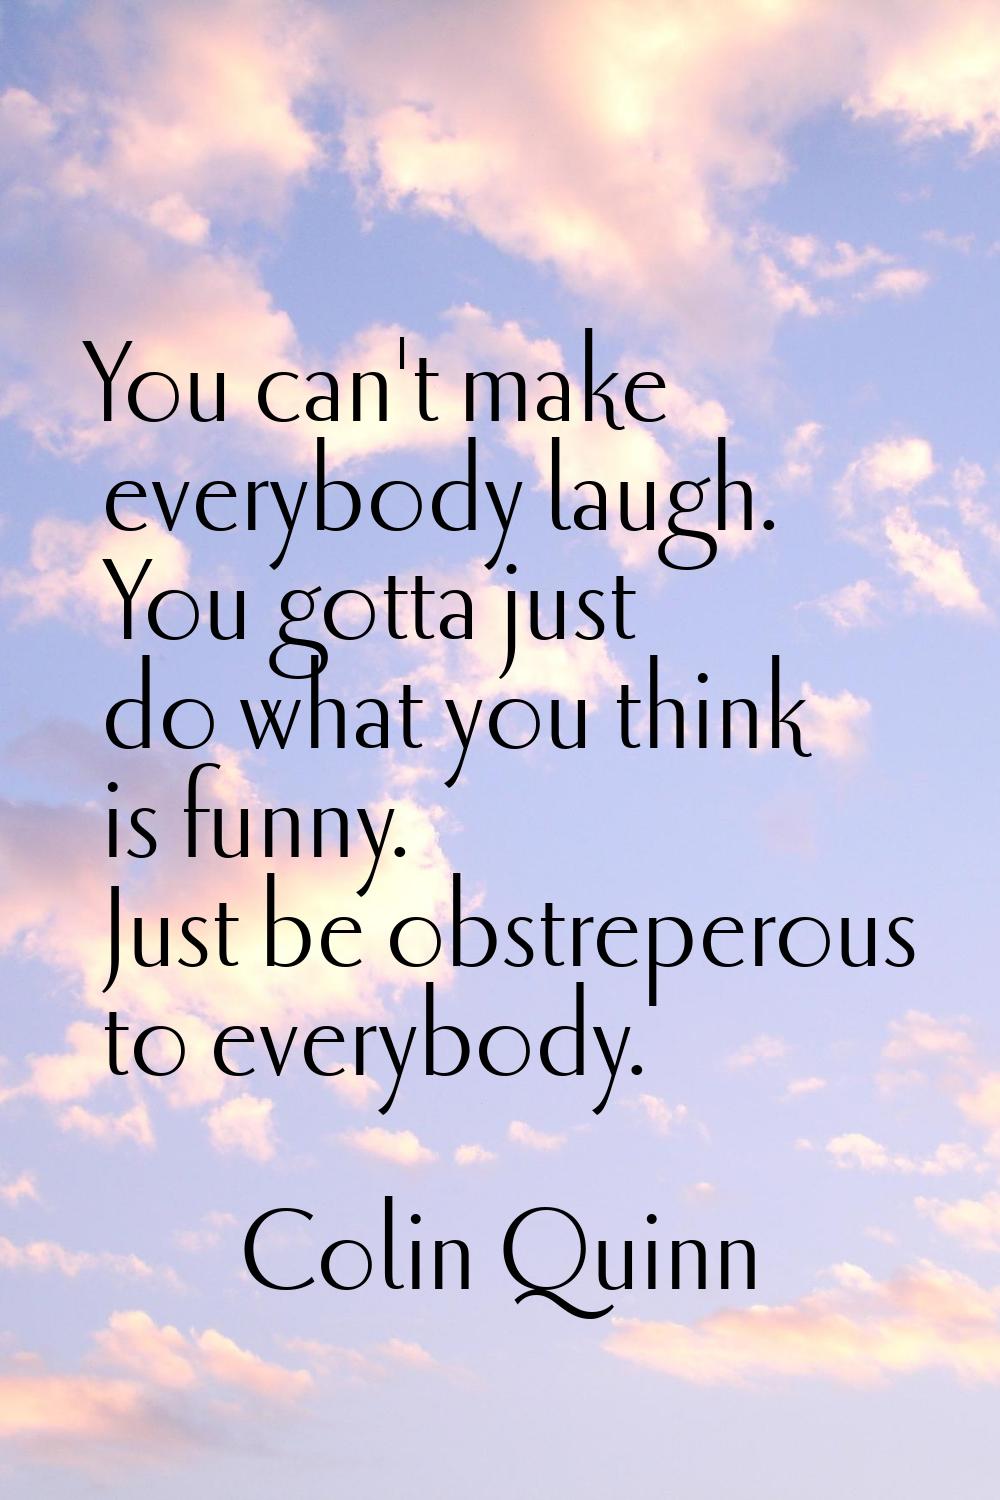 You can't make everybody laugh. You gotta just do what you think is funny. Just be obstreperous to 